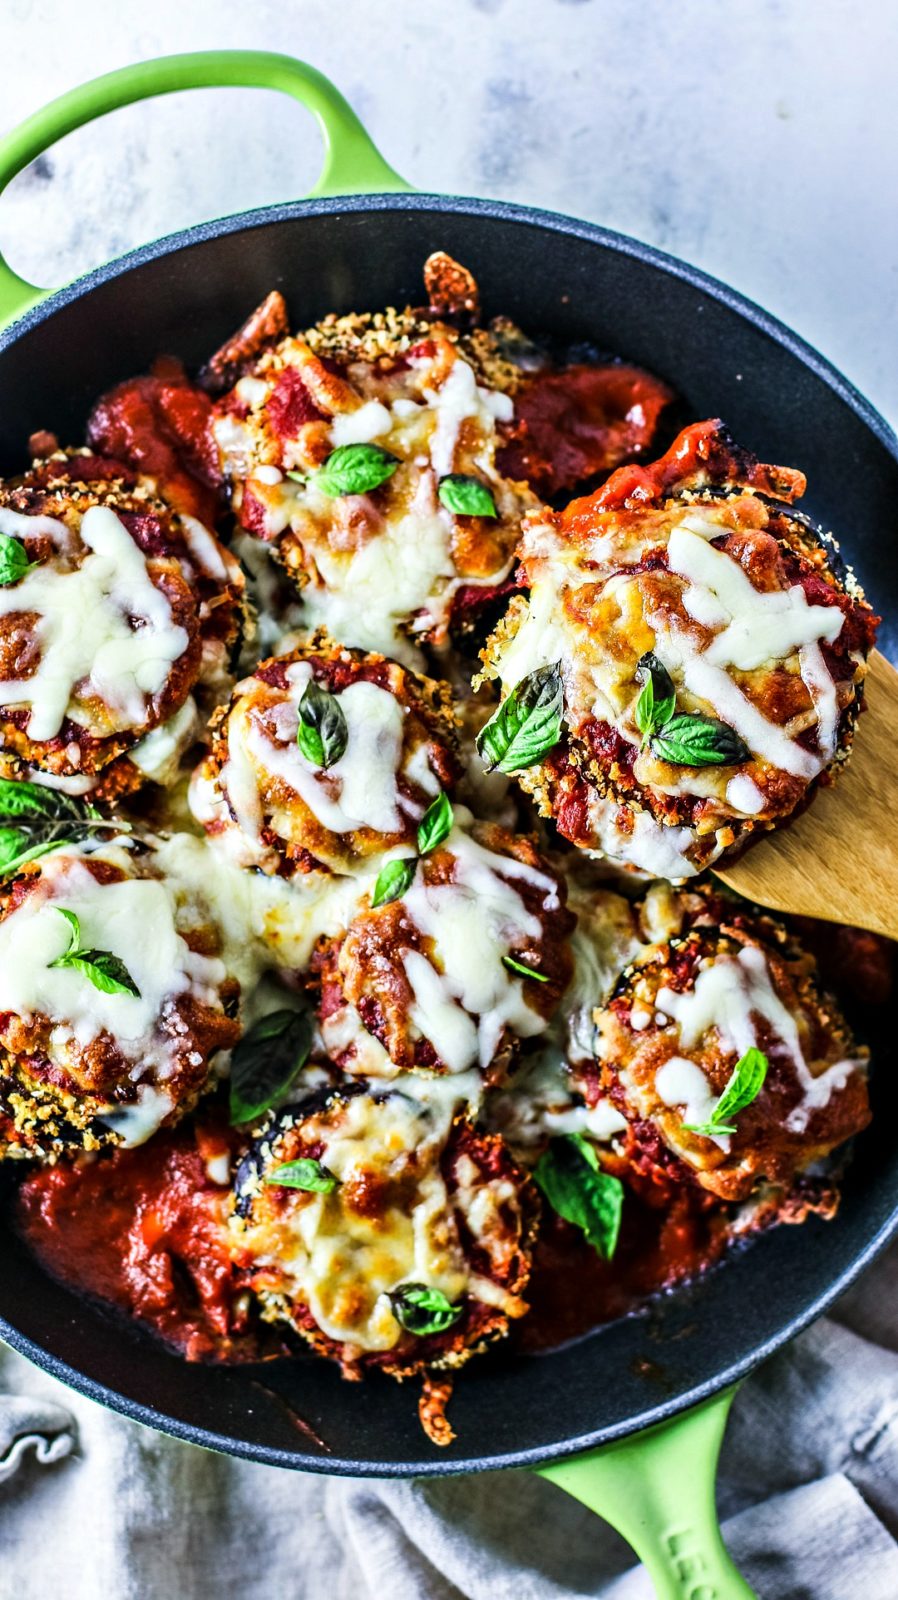 Saucy and cheesy eggplant parmesan in a skillet.